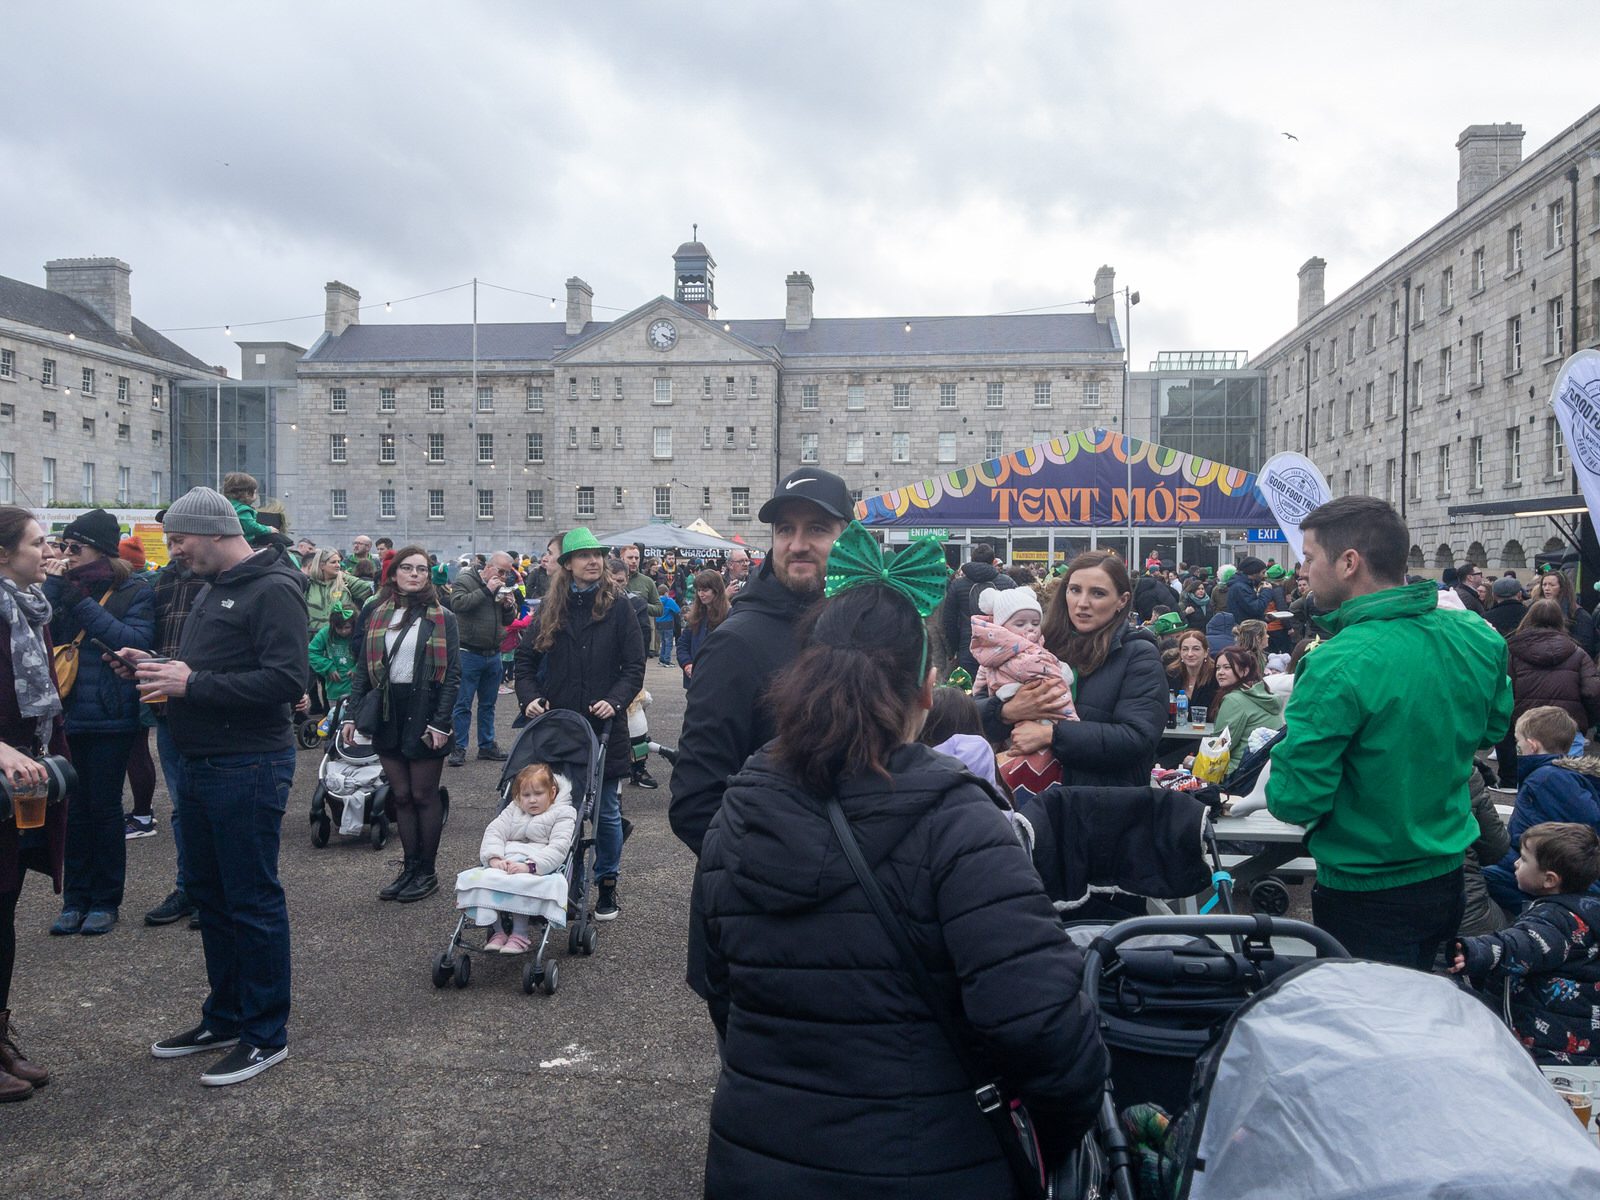 ST. PATRICK'S FESTIVAL QUARTER AT THE NATIONAL MUSEUM OF IRELAND 016